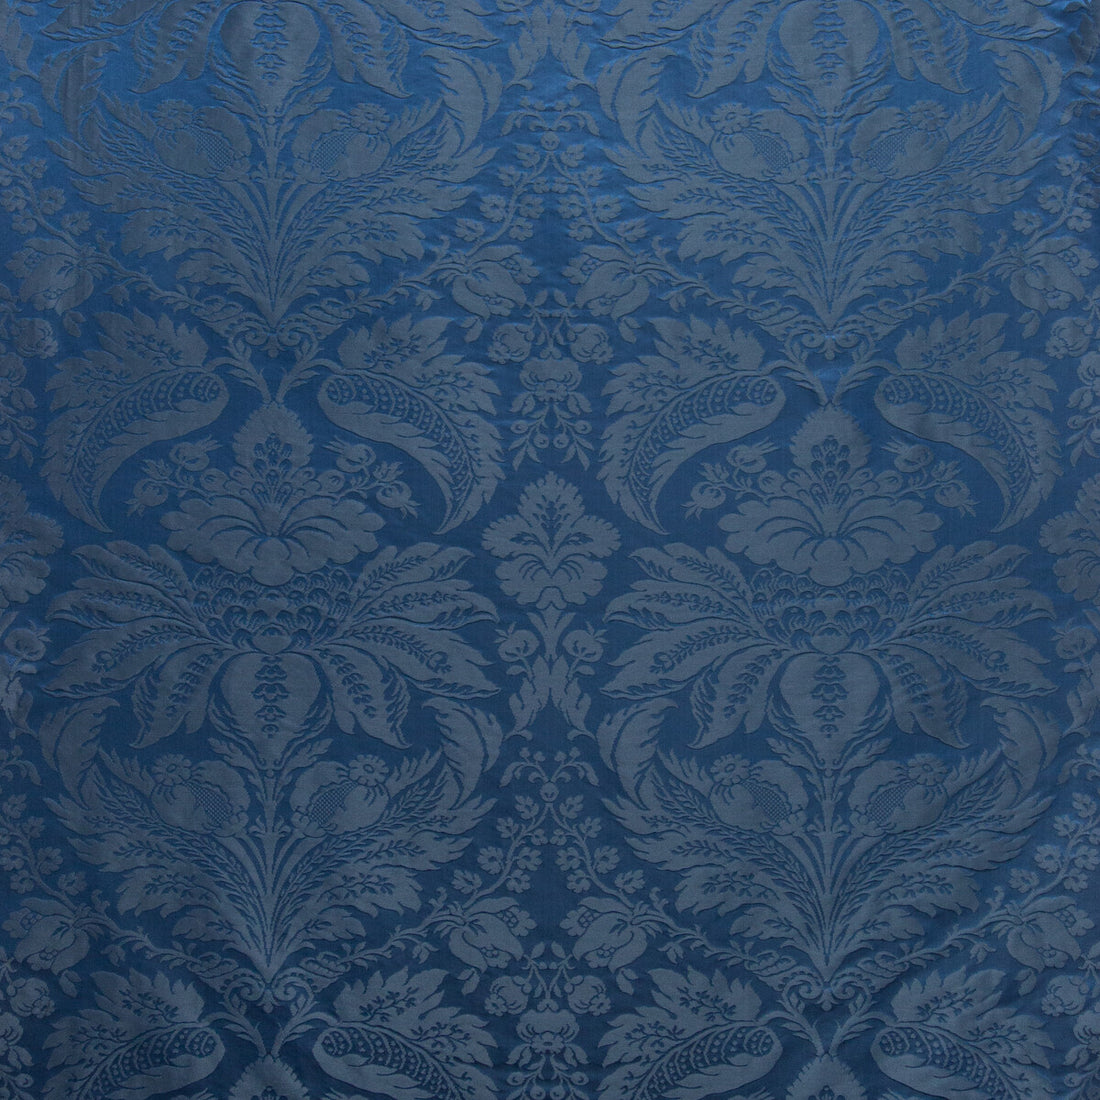 Damask Pierre fabric in ocean color - pattern 8013188.55.0 - by Brunschwig &amp; Fils in the B&amp;F Showroom Exclusive 2019 collection